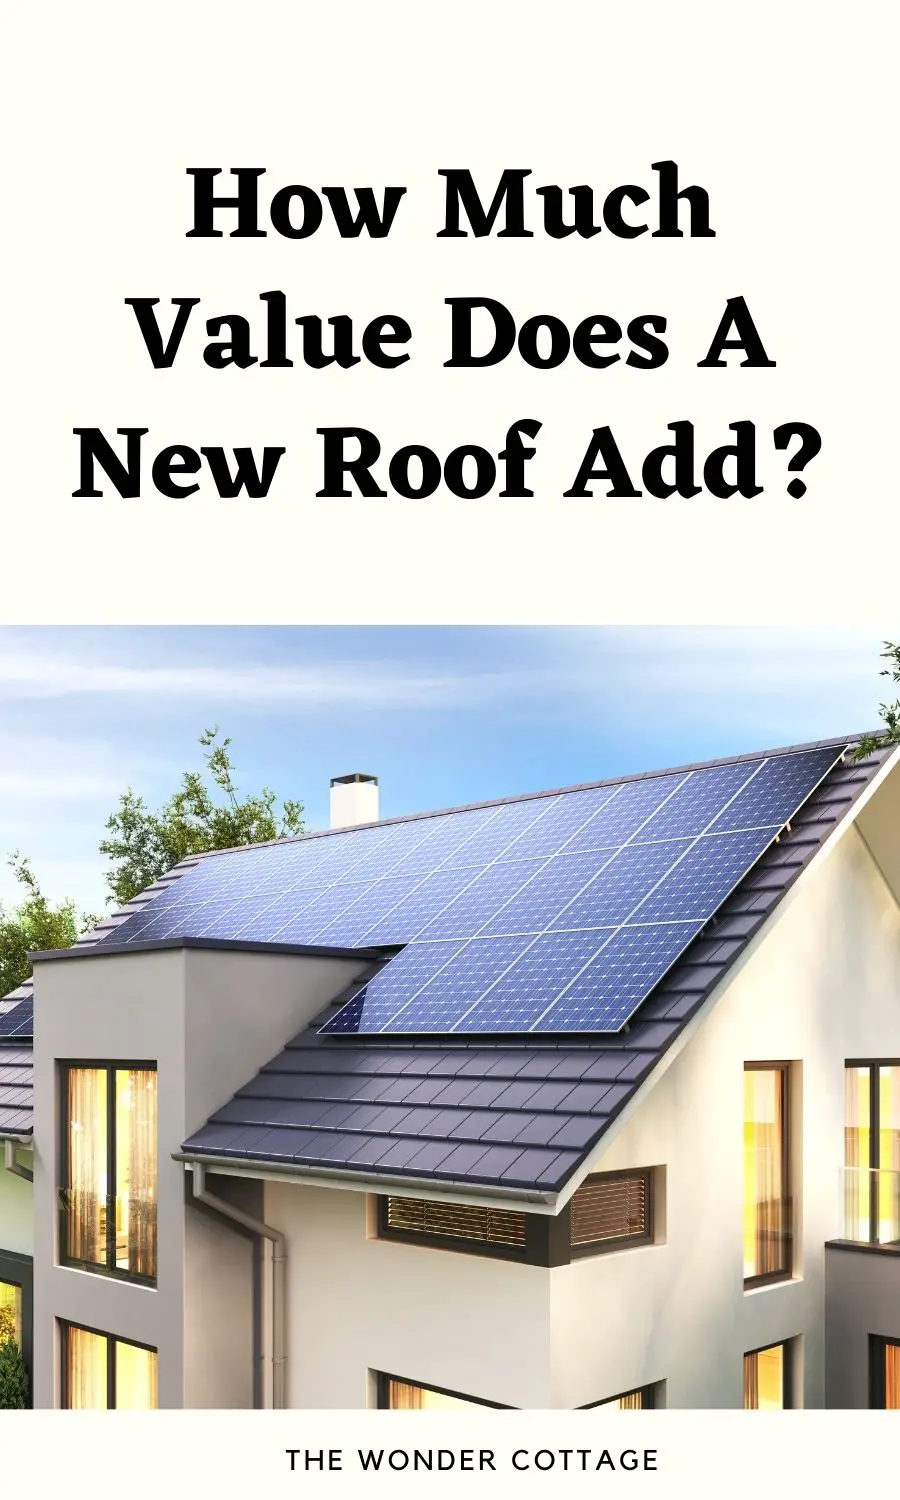 How Much Value Does A New Roof Add?